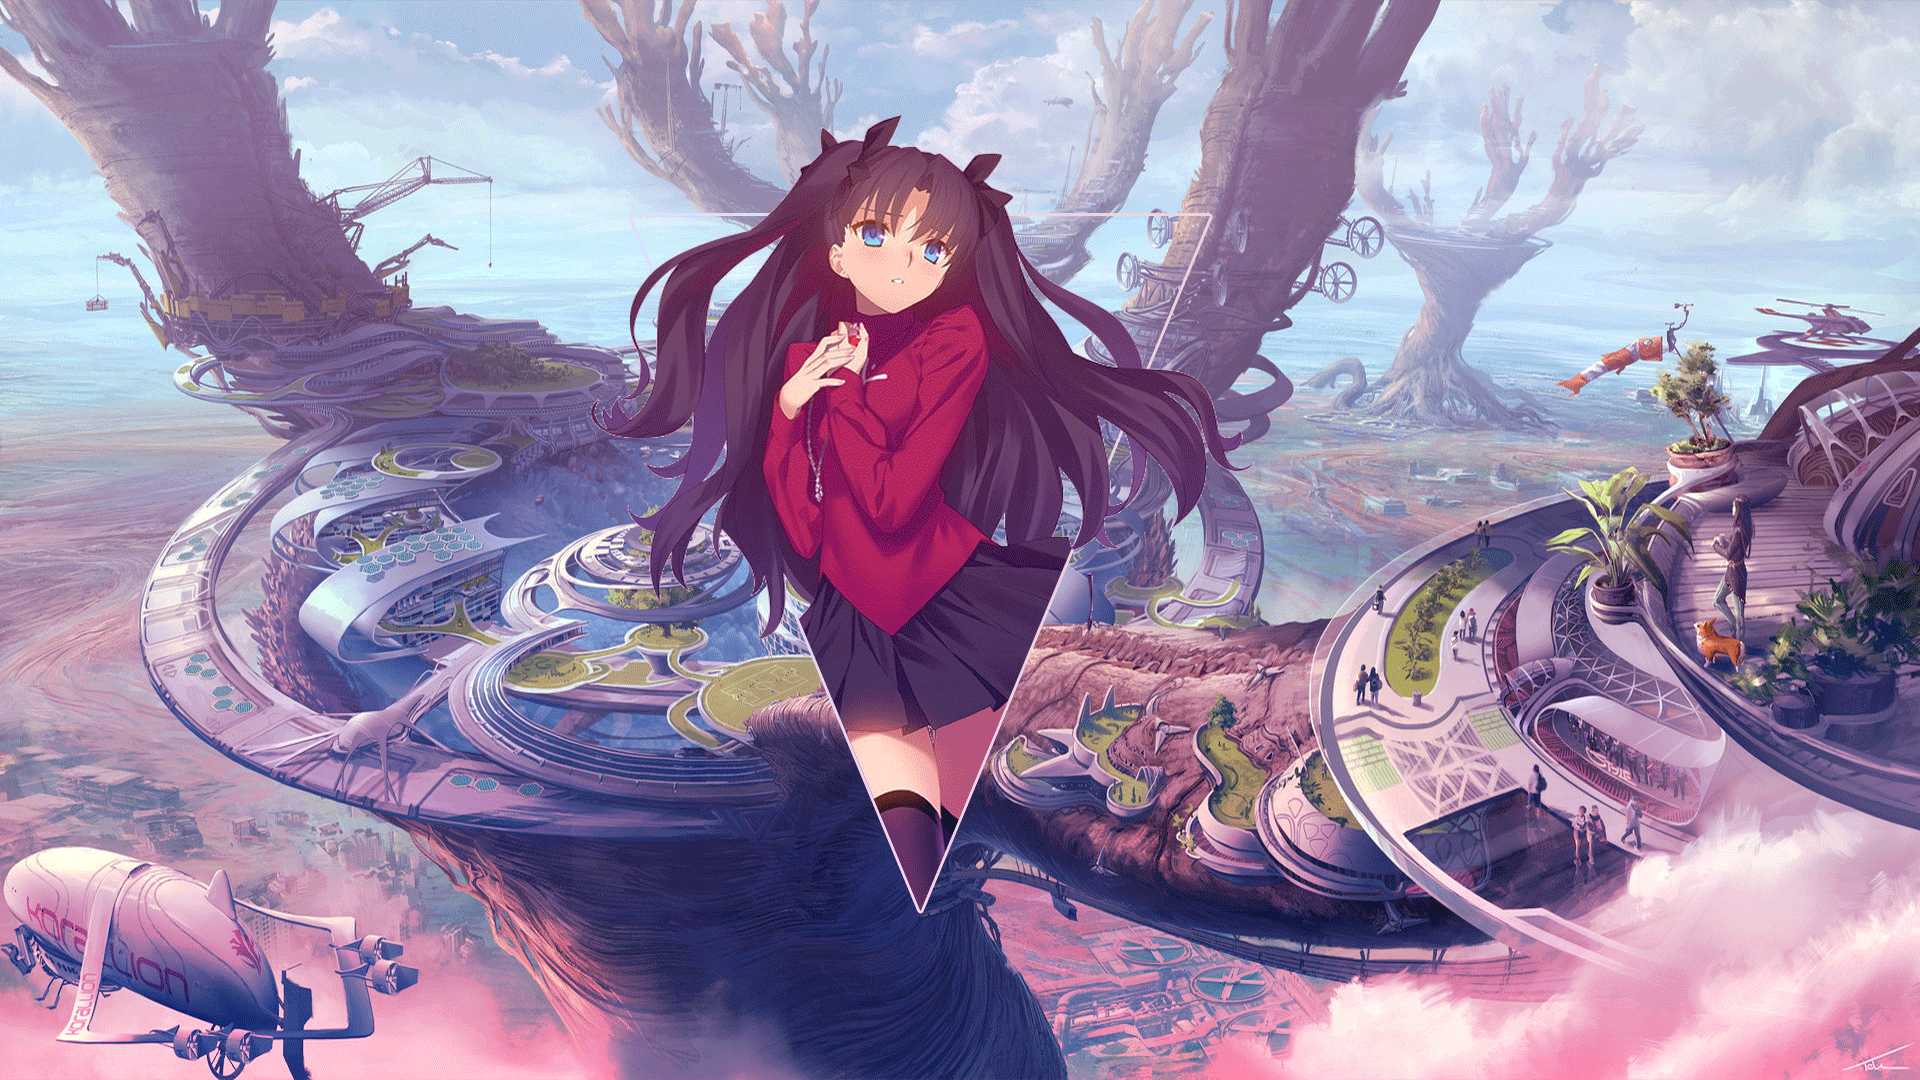 Anime 1920x1080 anime anime girls Tohsaka Rin Fate/Stay Night city digital art picture-in-picture Fate series Fate/Stay Night: Unlimited Blade Works